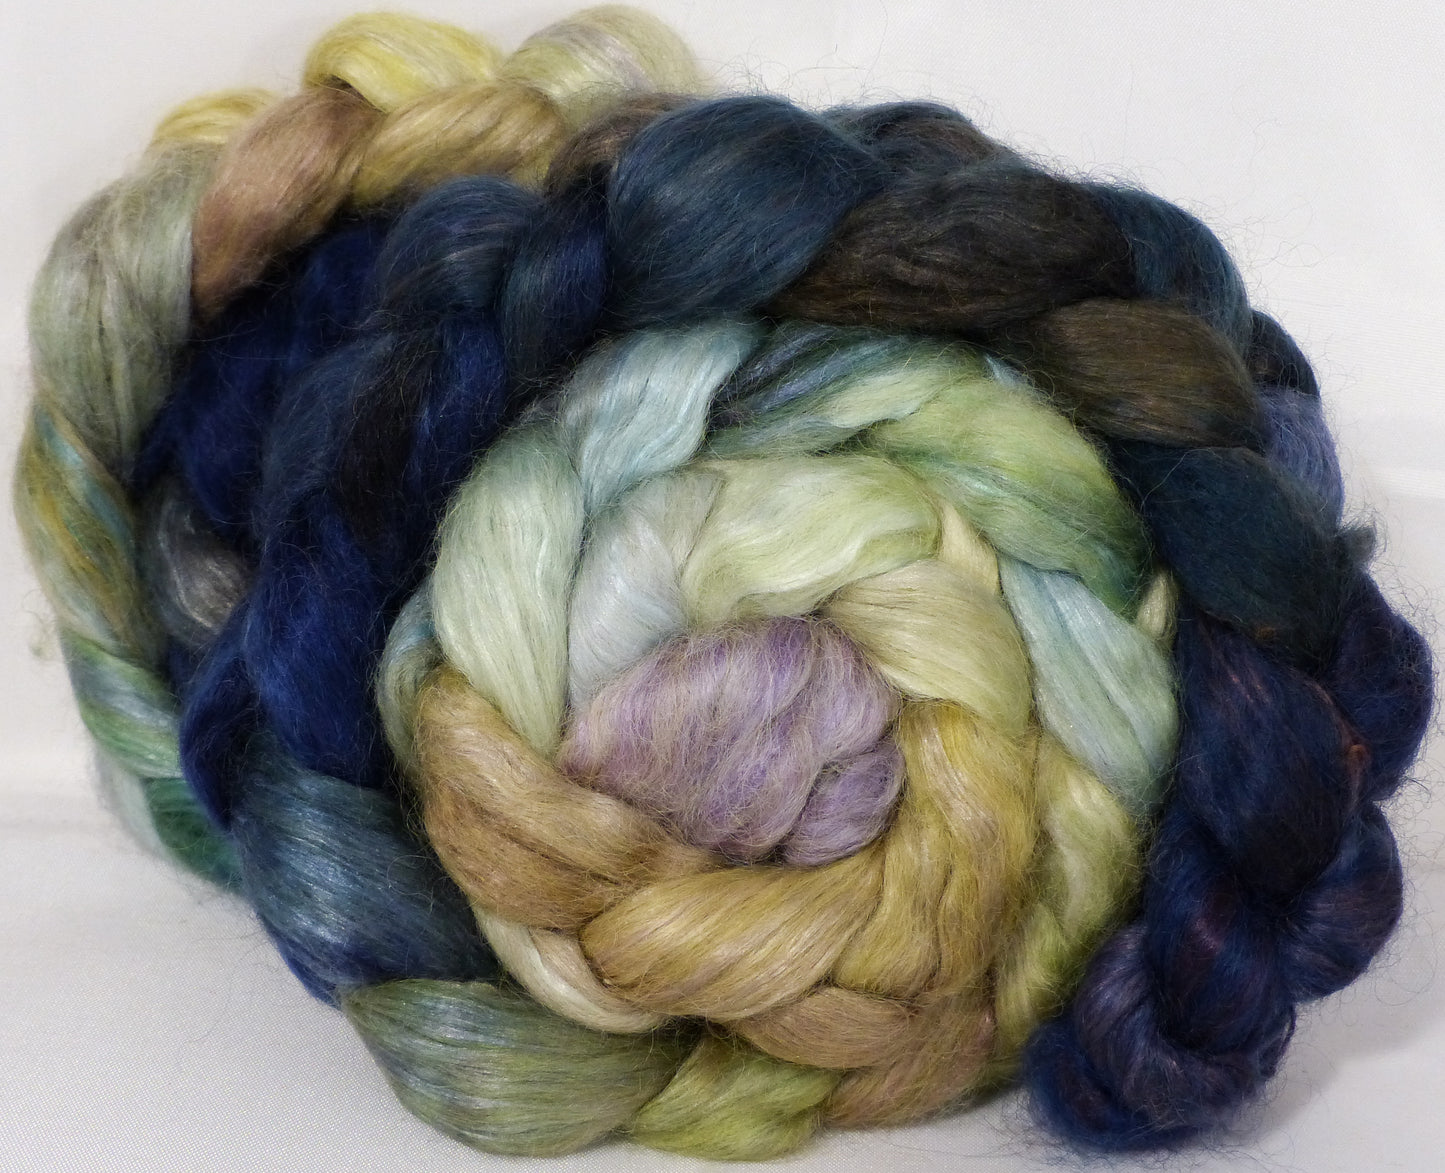 Hand-dyed wensleydale/ mulberry silk roving ( 65/35) -Downpour- ( 5.1 oz.) - Inglenook Fibers